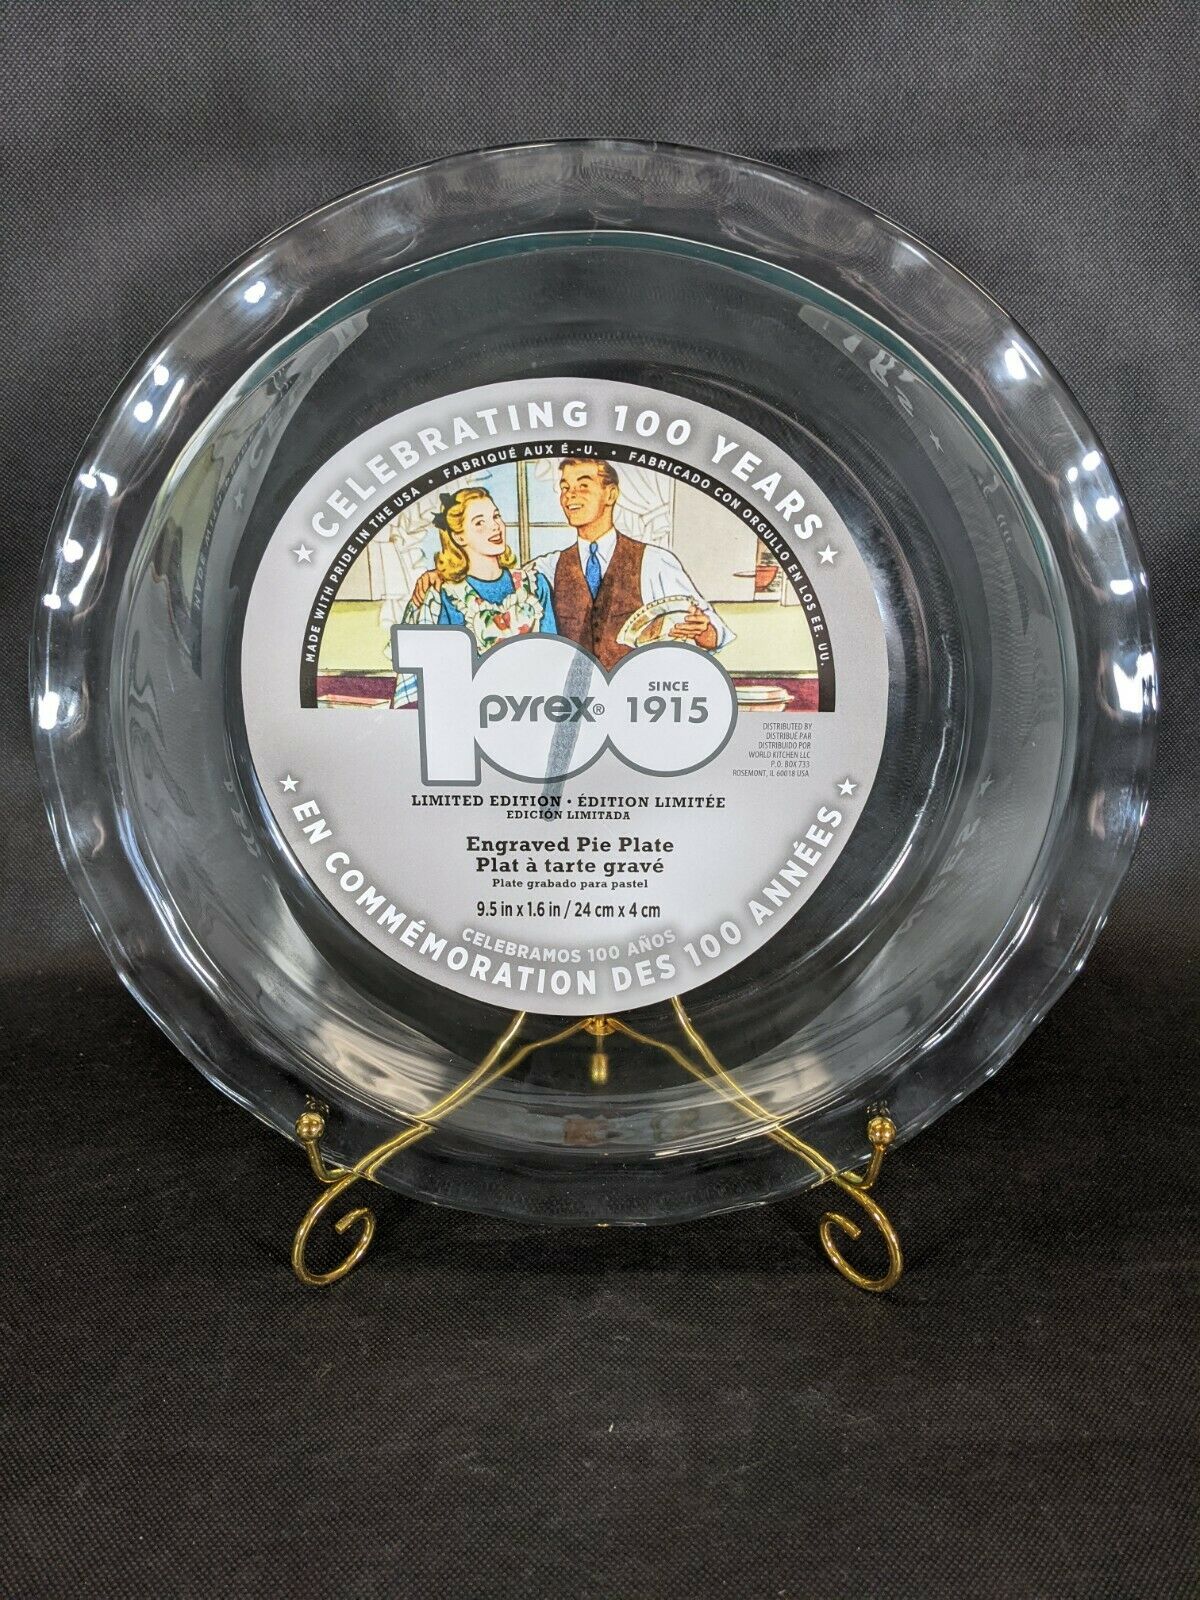 PYREX COLLECTIBLE 100TH Anniversary LIMITED EDITION Engraved Pie Plate 9.5